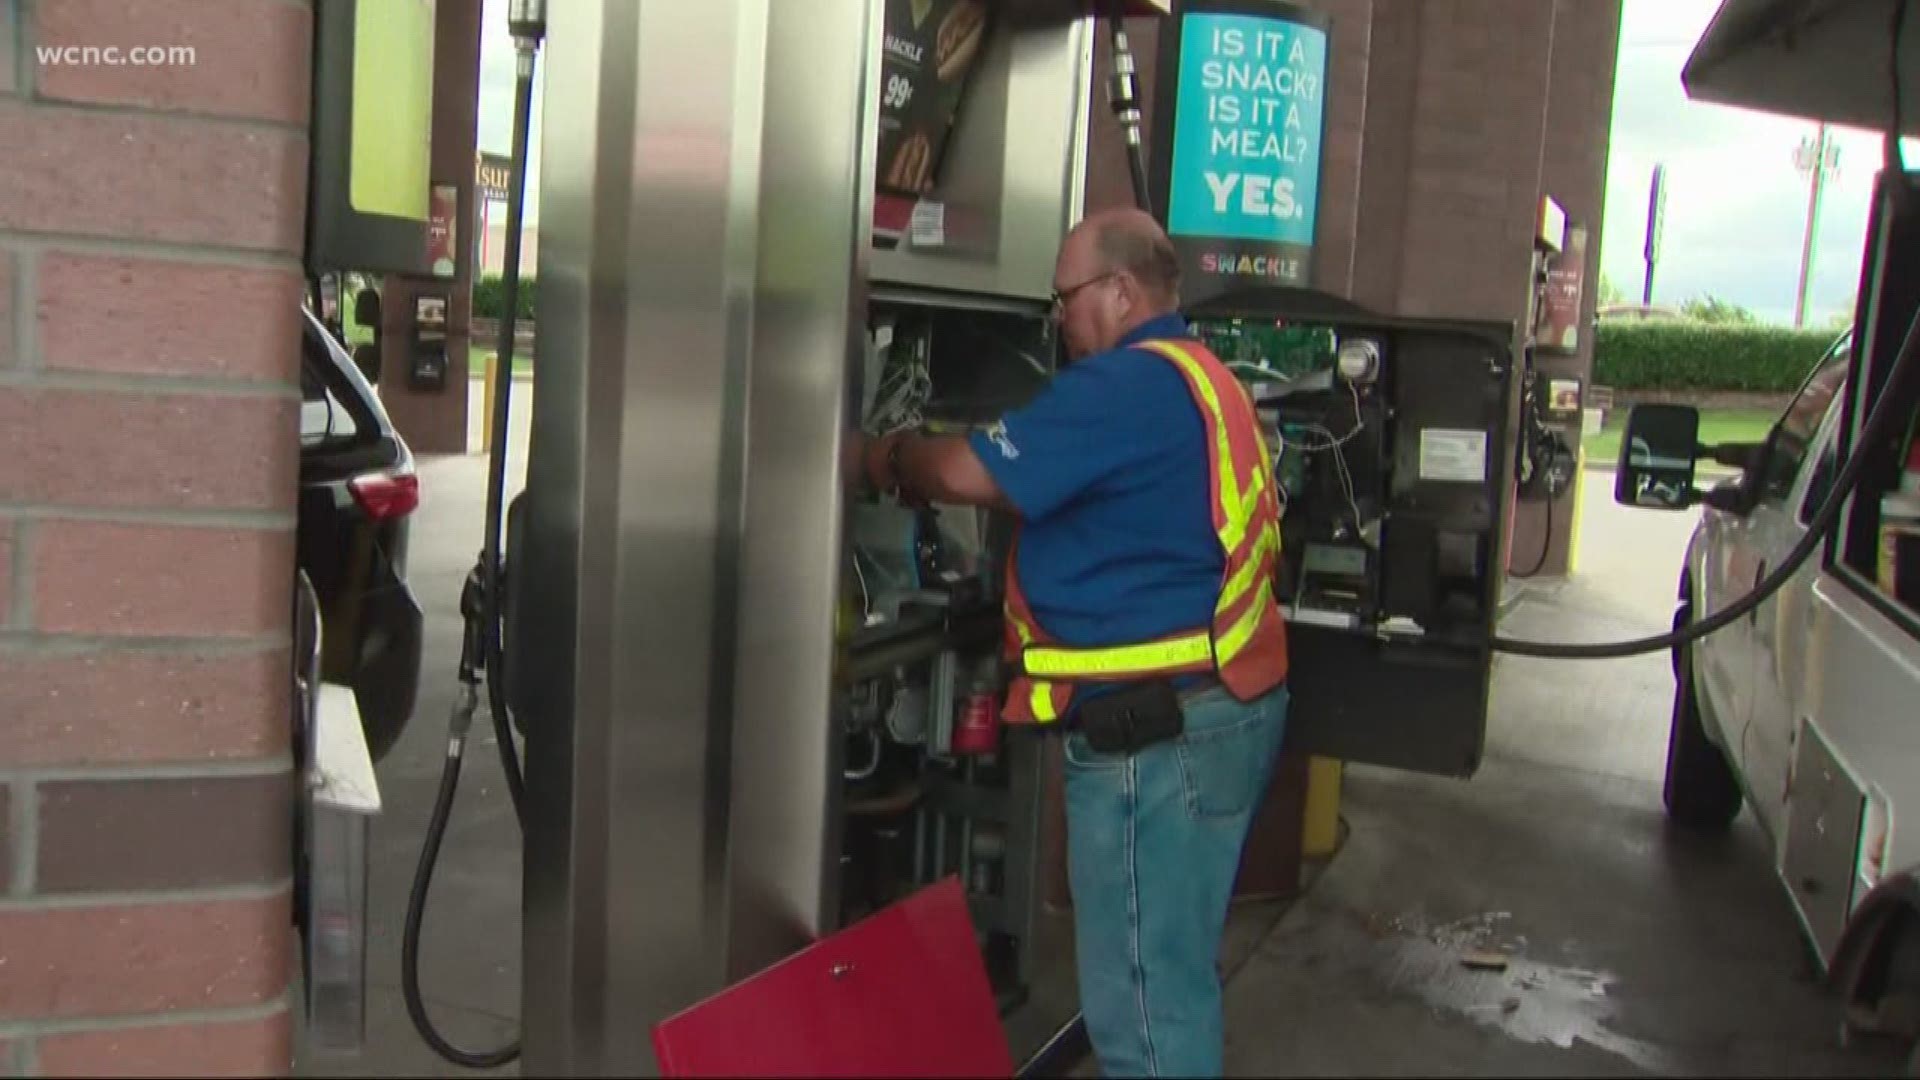 State inspectors test every gas pump at least once a year to make sure you're not getting cheated.